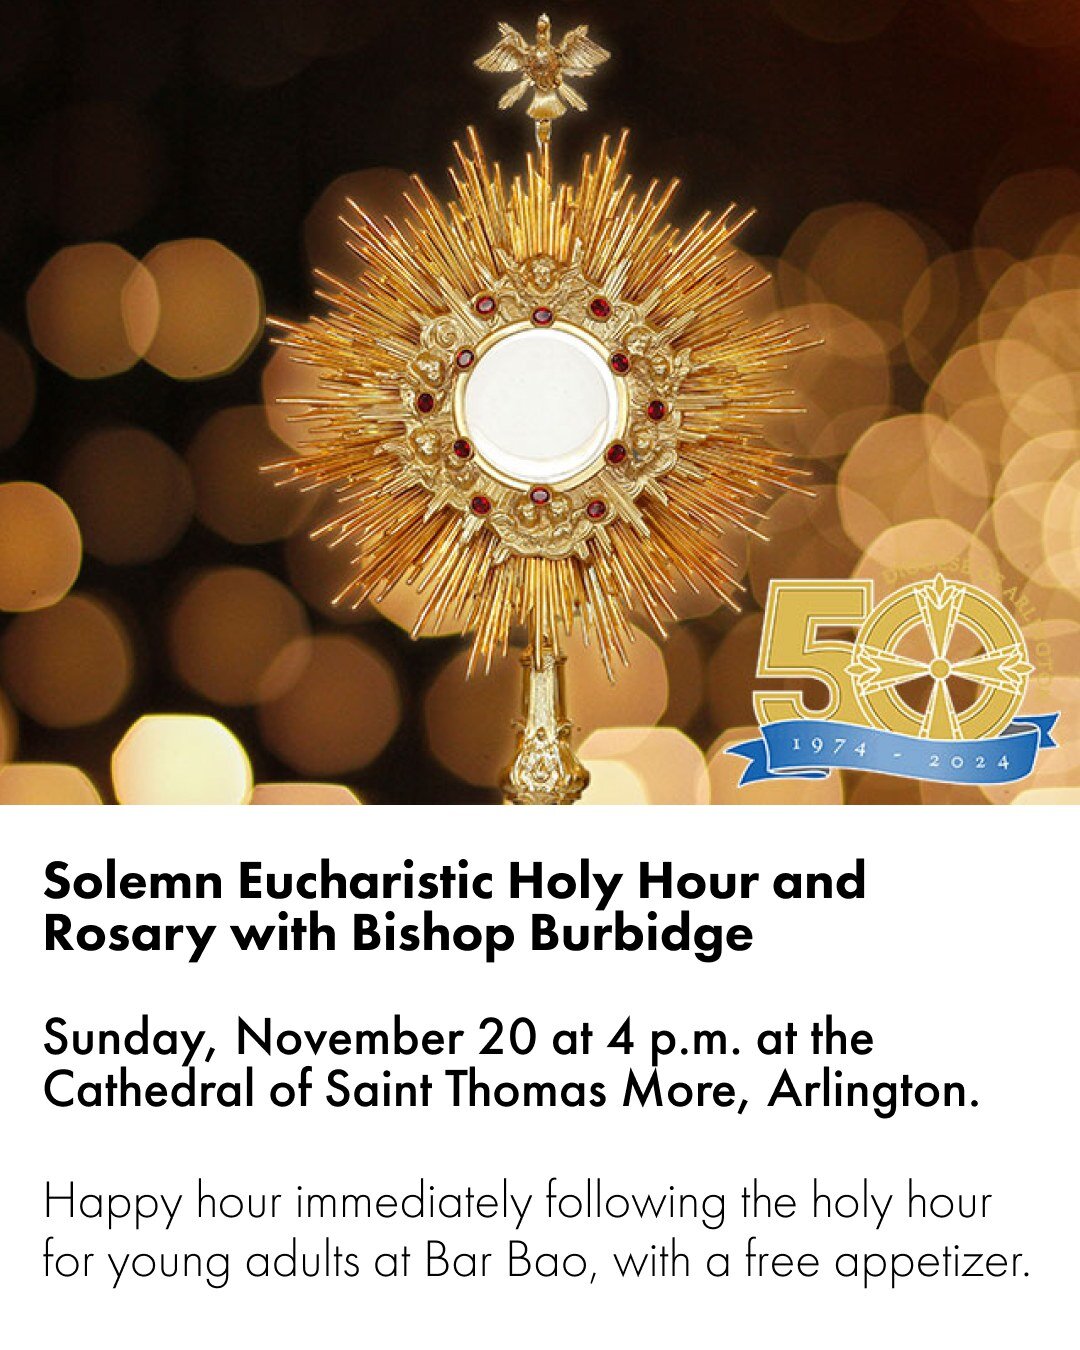 You are invited to join Bishop Burbidge for a Solemn Eucharistic Holy Hour with the Recitation of the Holy Rosary to inaugurate Preparation Year II of our diocesan Golden Jubilee. The theme for Year II is &quot;Rejoice: My soul rejoices in the Lord!&